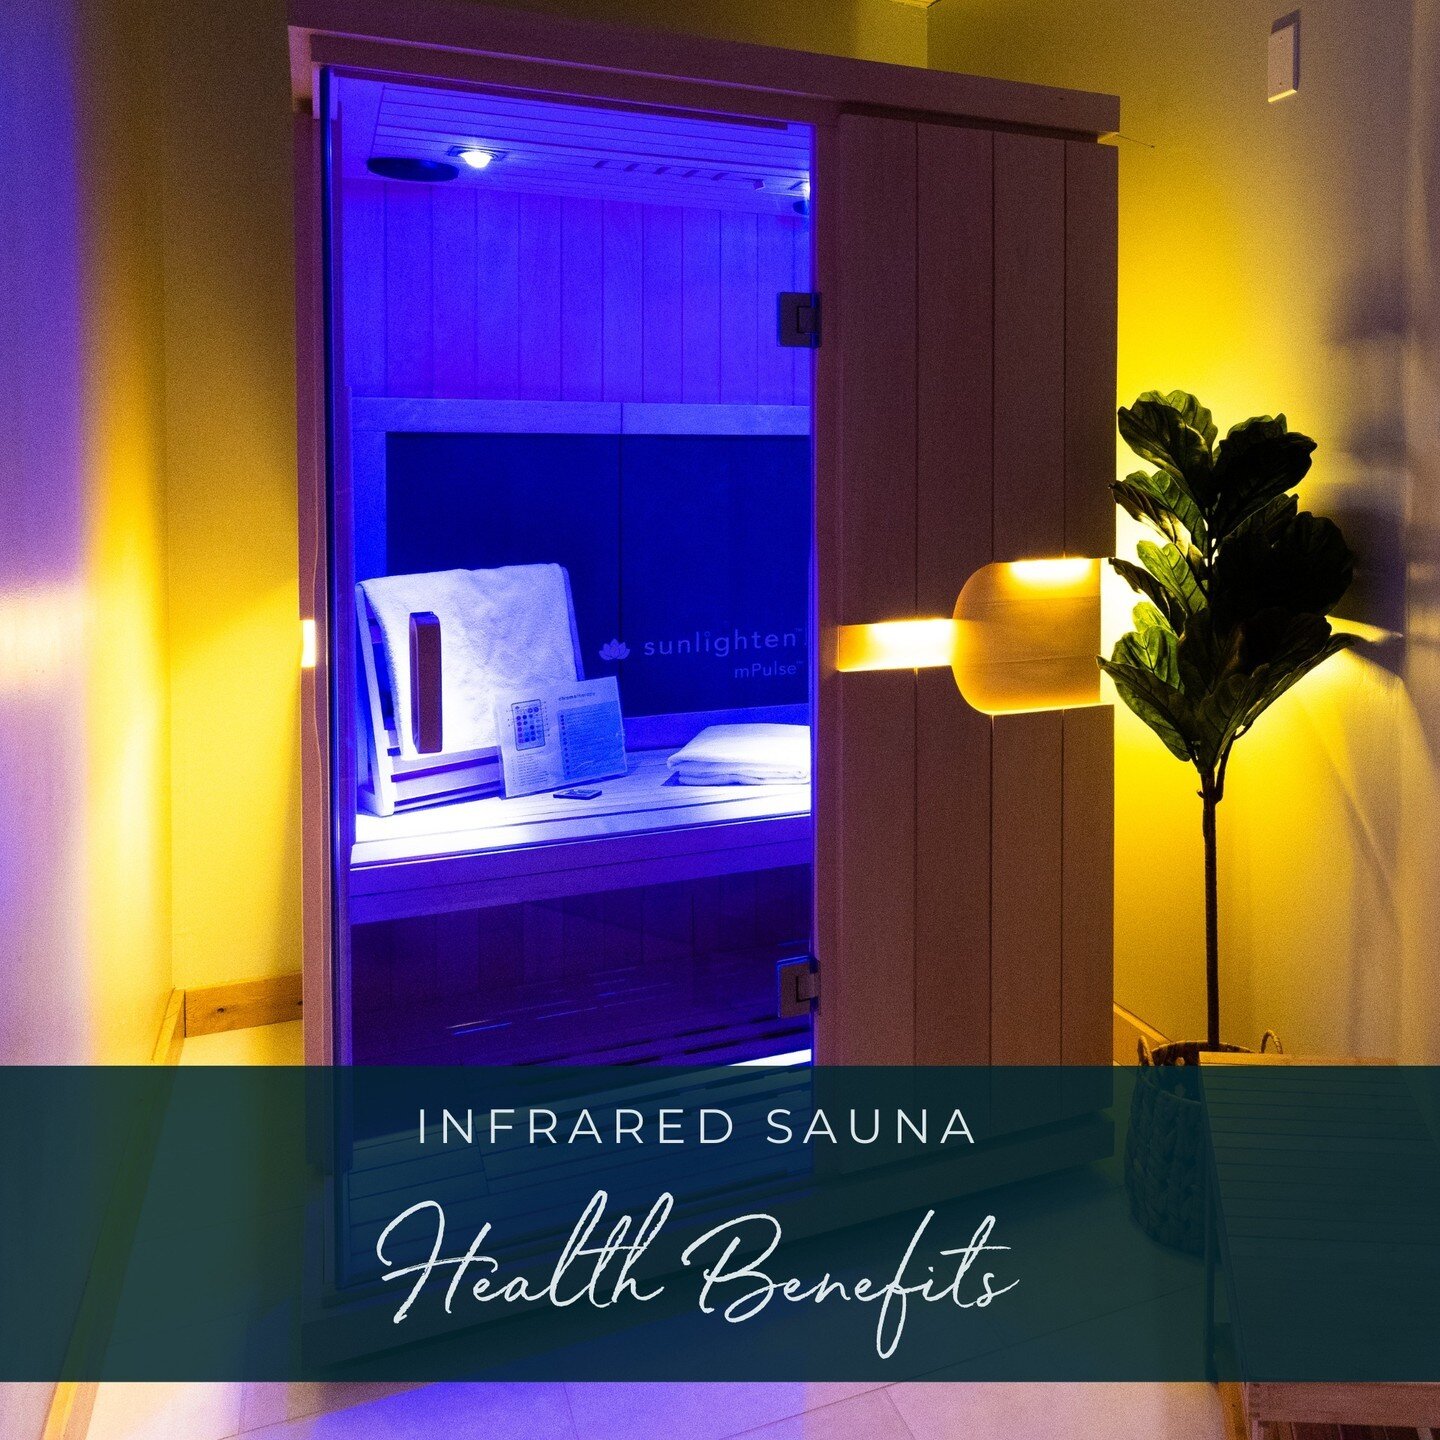 🔥Warm up while you relax and recover with us in our private Infrared Sauna! 🔥

Our full spectrum infrared sauna blends the 3 optimal wavelengths to achieve specific results.

✅ Immunity Boost
✅ Natural Detox
✅ Reduces Stress Levels
✅ Burns Calories